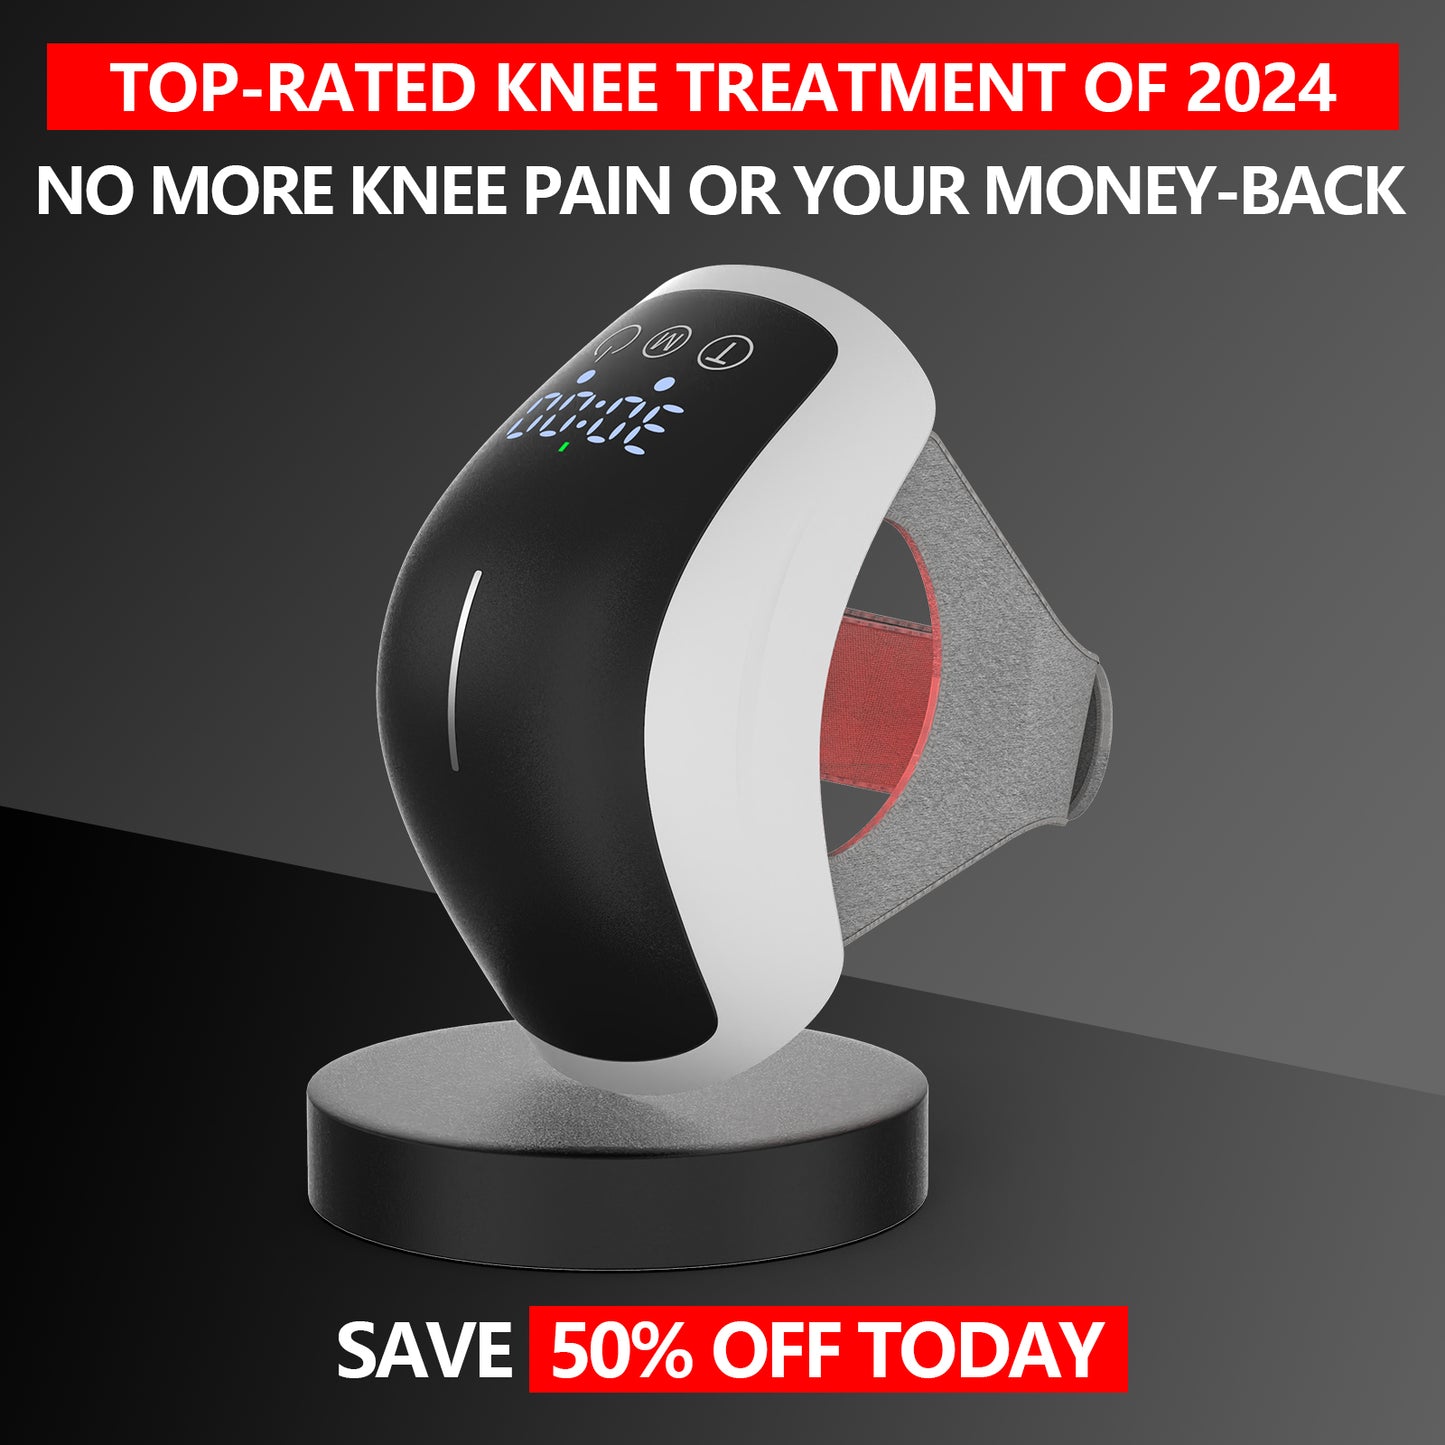 KTS® Infrared Laser Knee Pain Therapy Massager